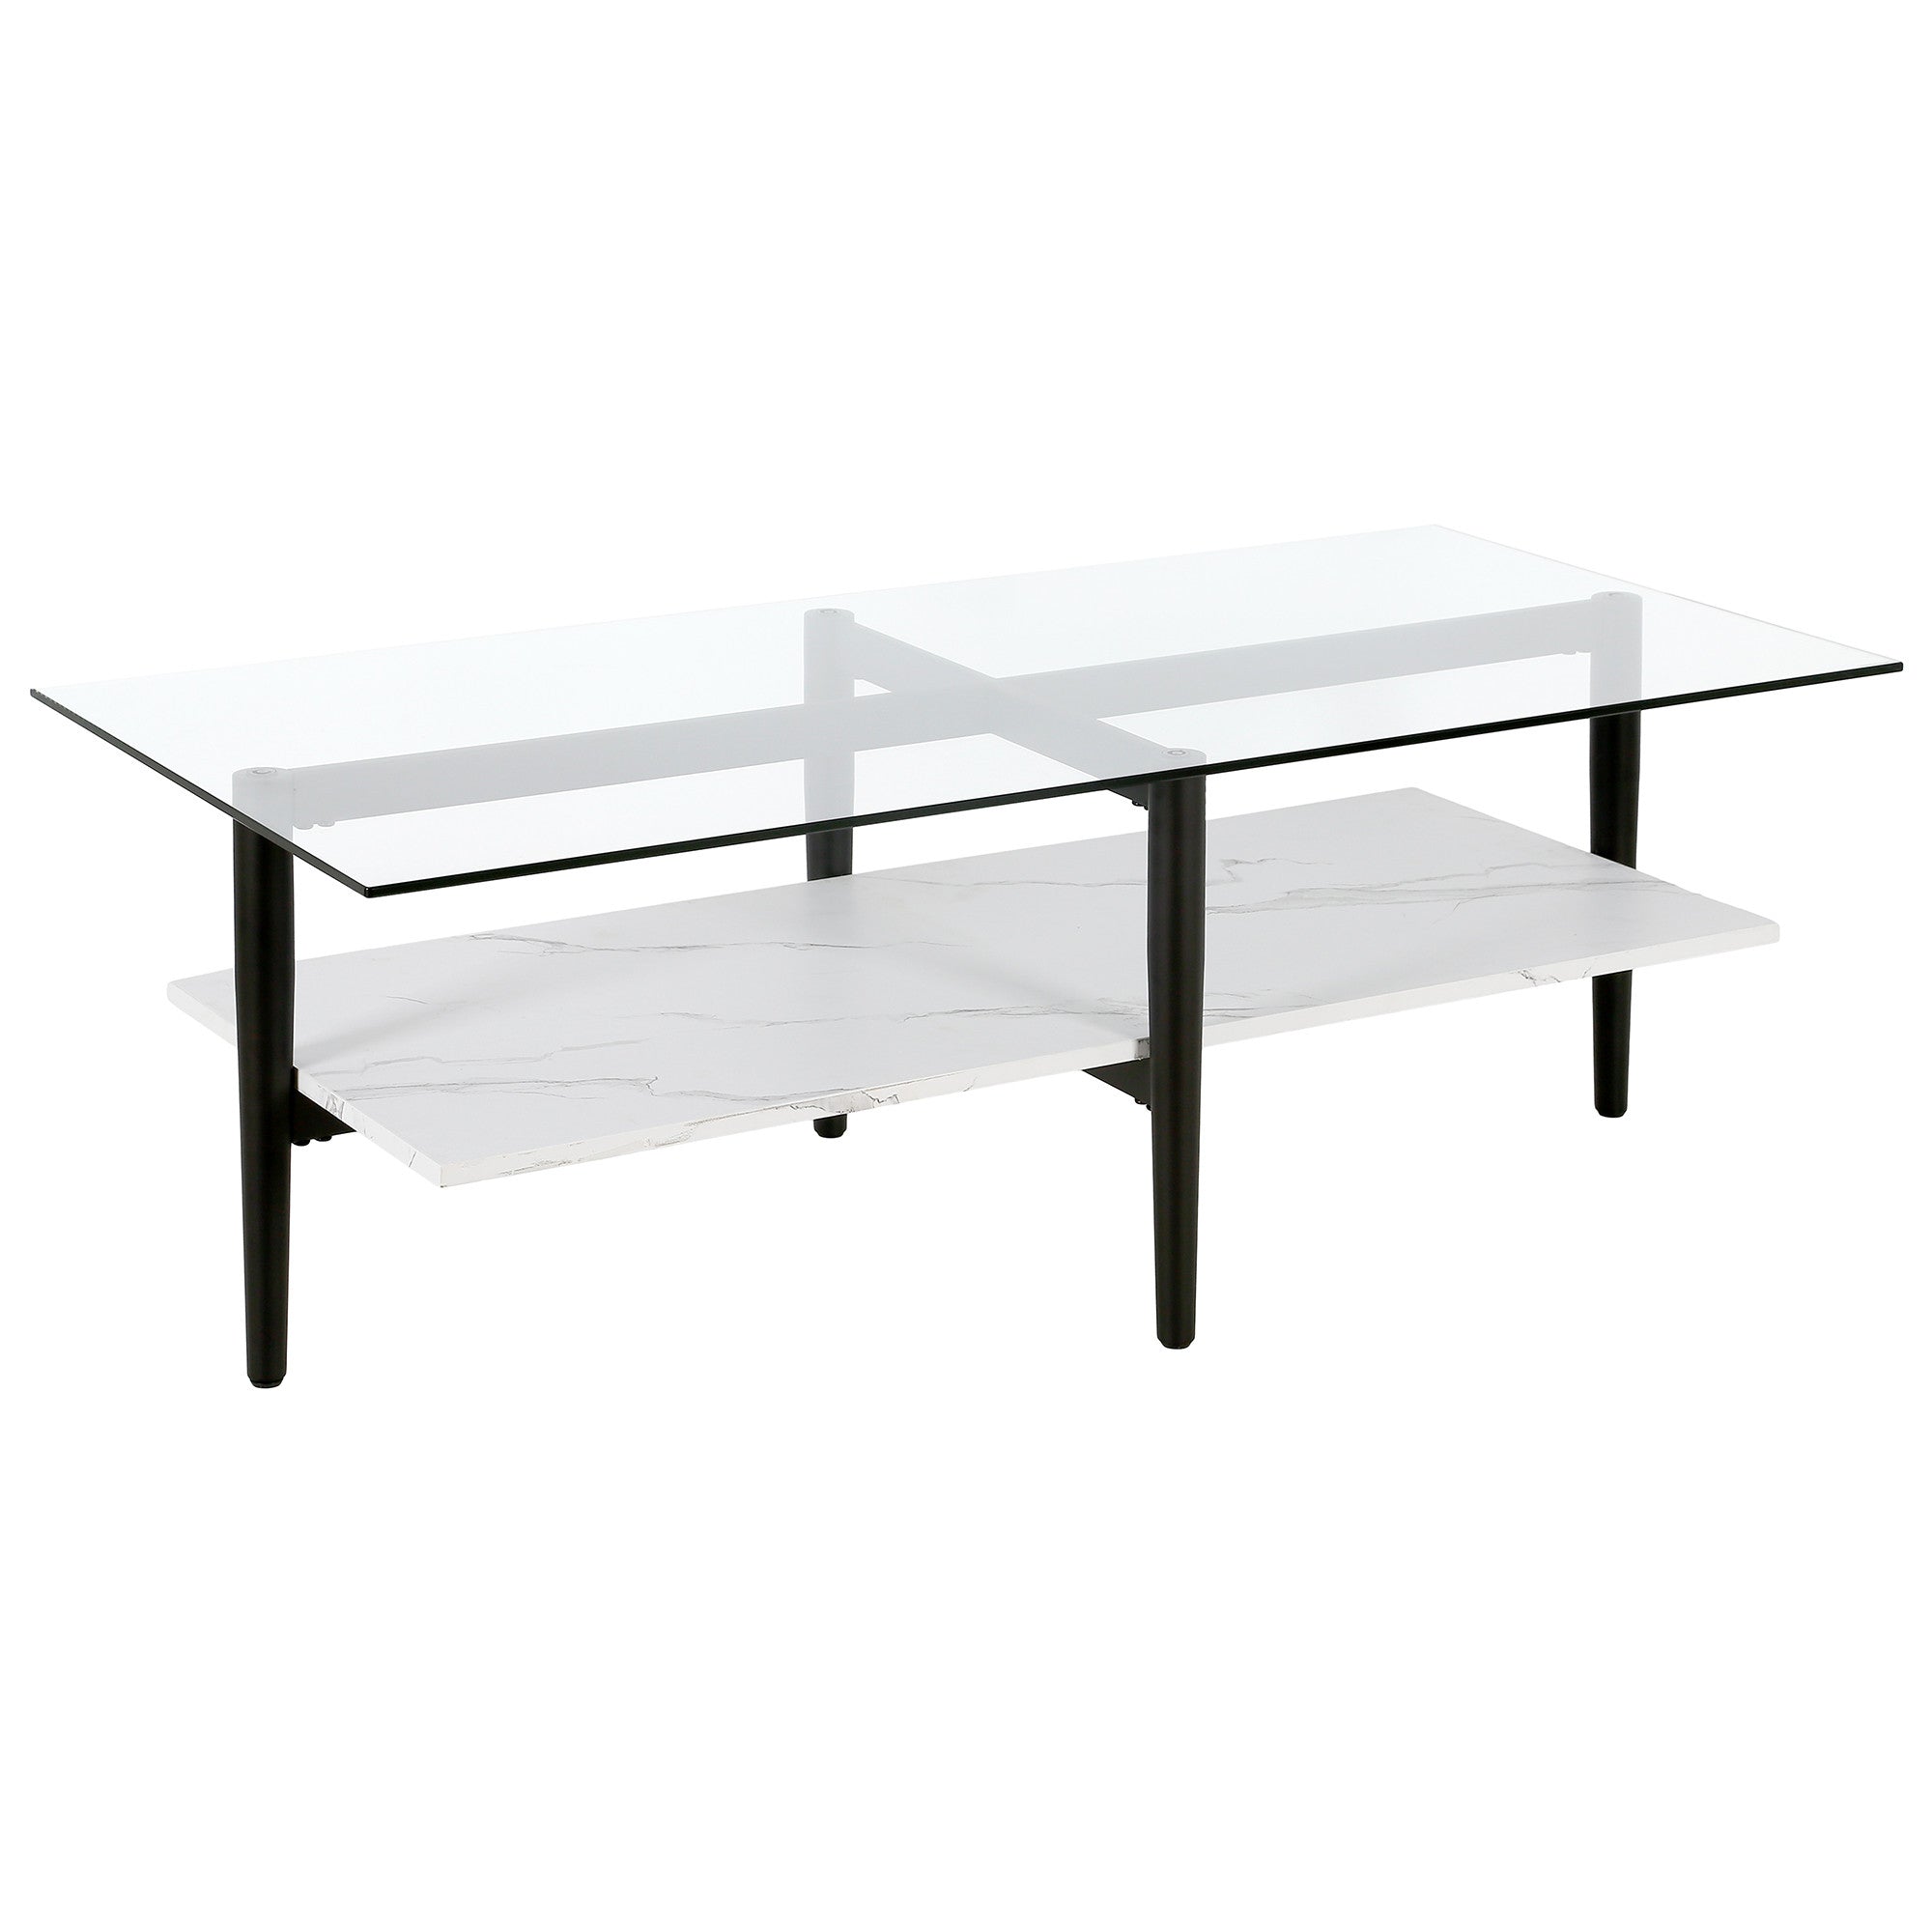 47" Black Glass And Steel Coffee Table With Shelf